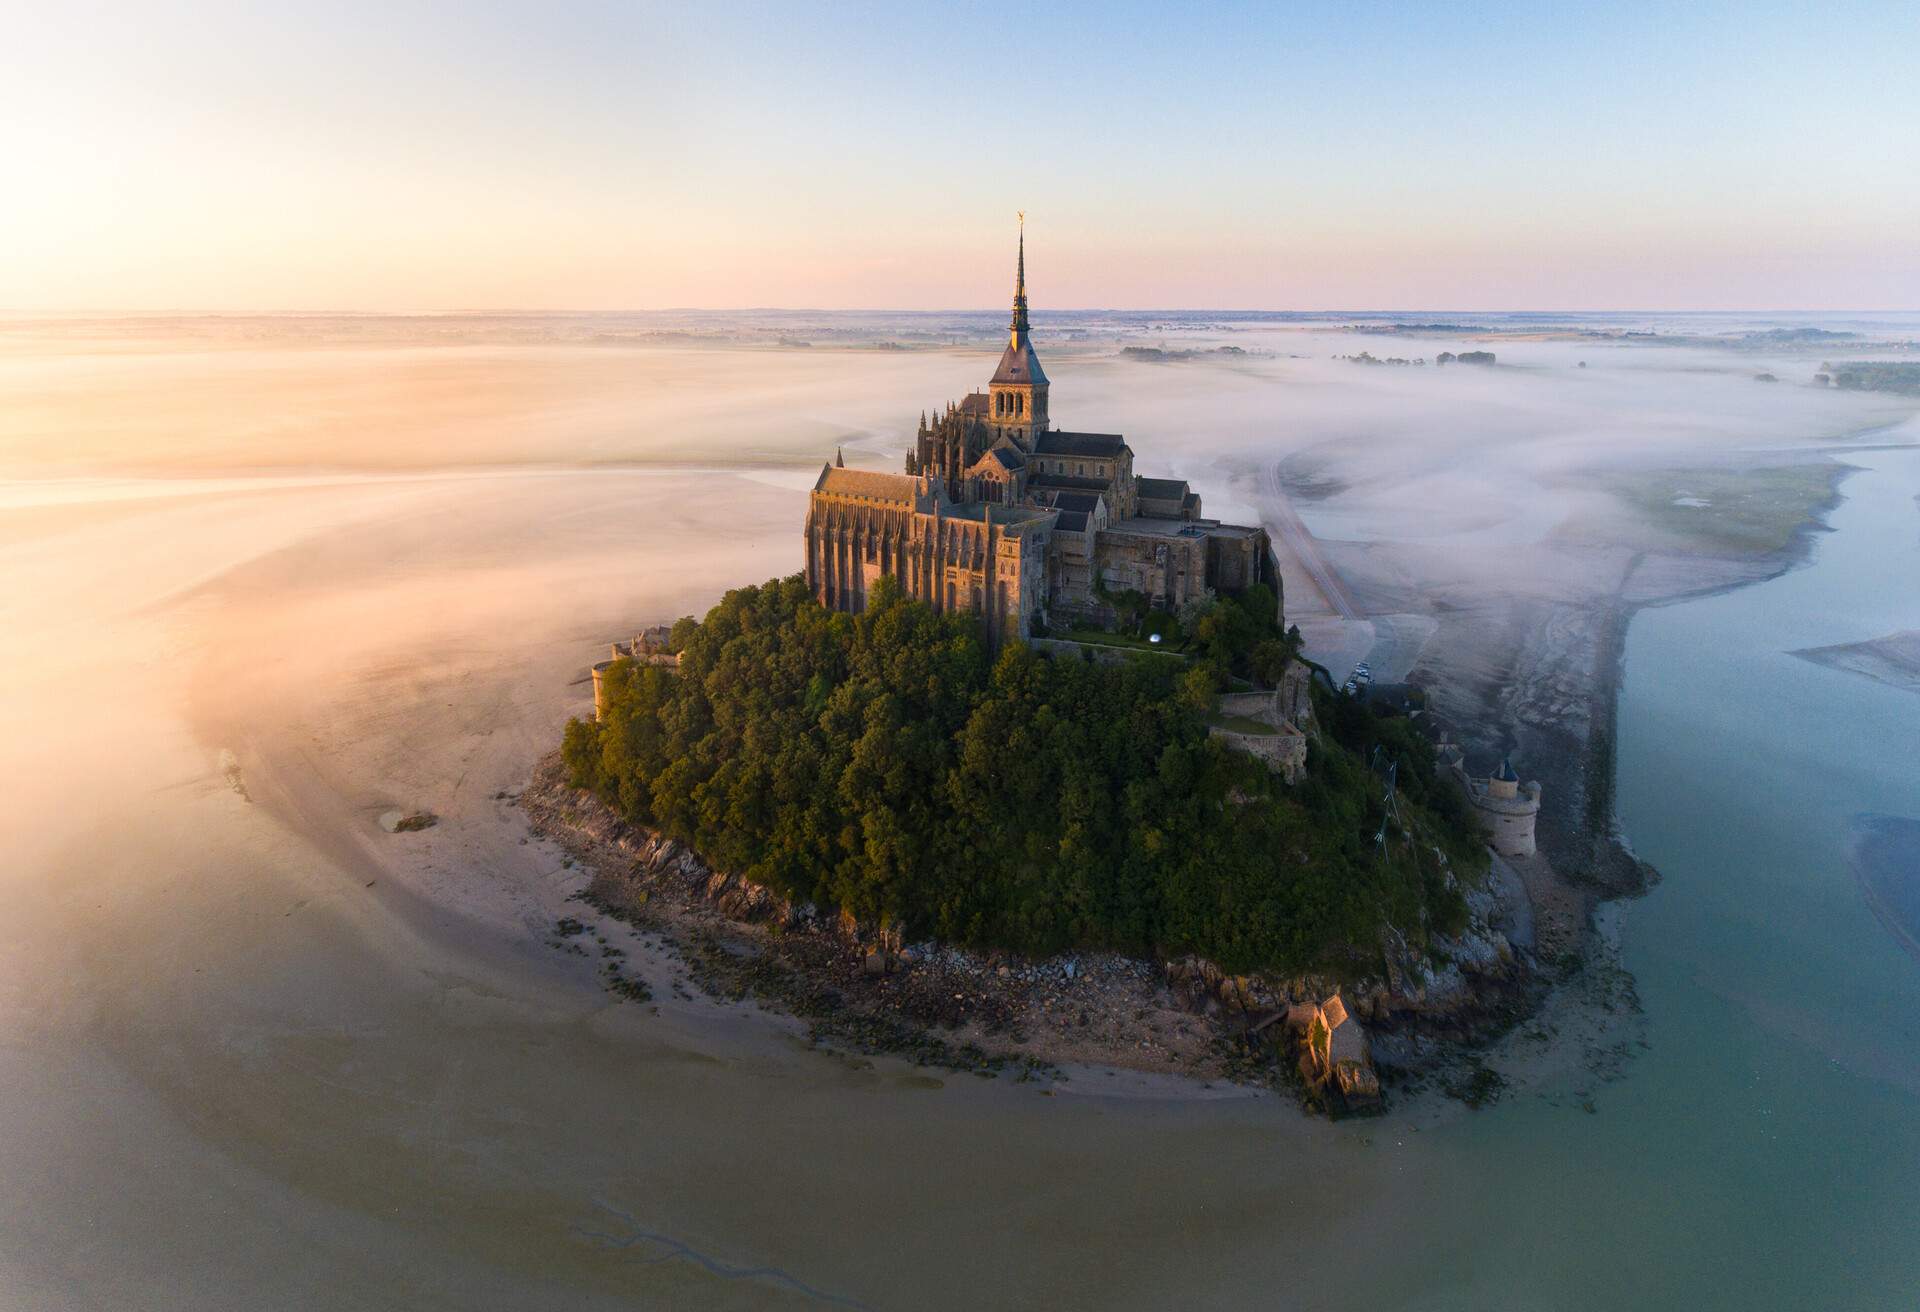 The abbey sat atop Mont Saint-Michel, surrounded by trees and water and shrouded in mist. 